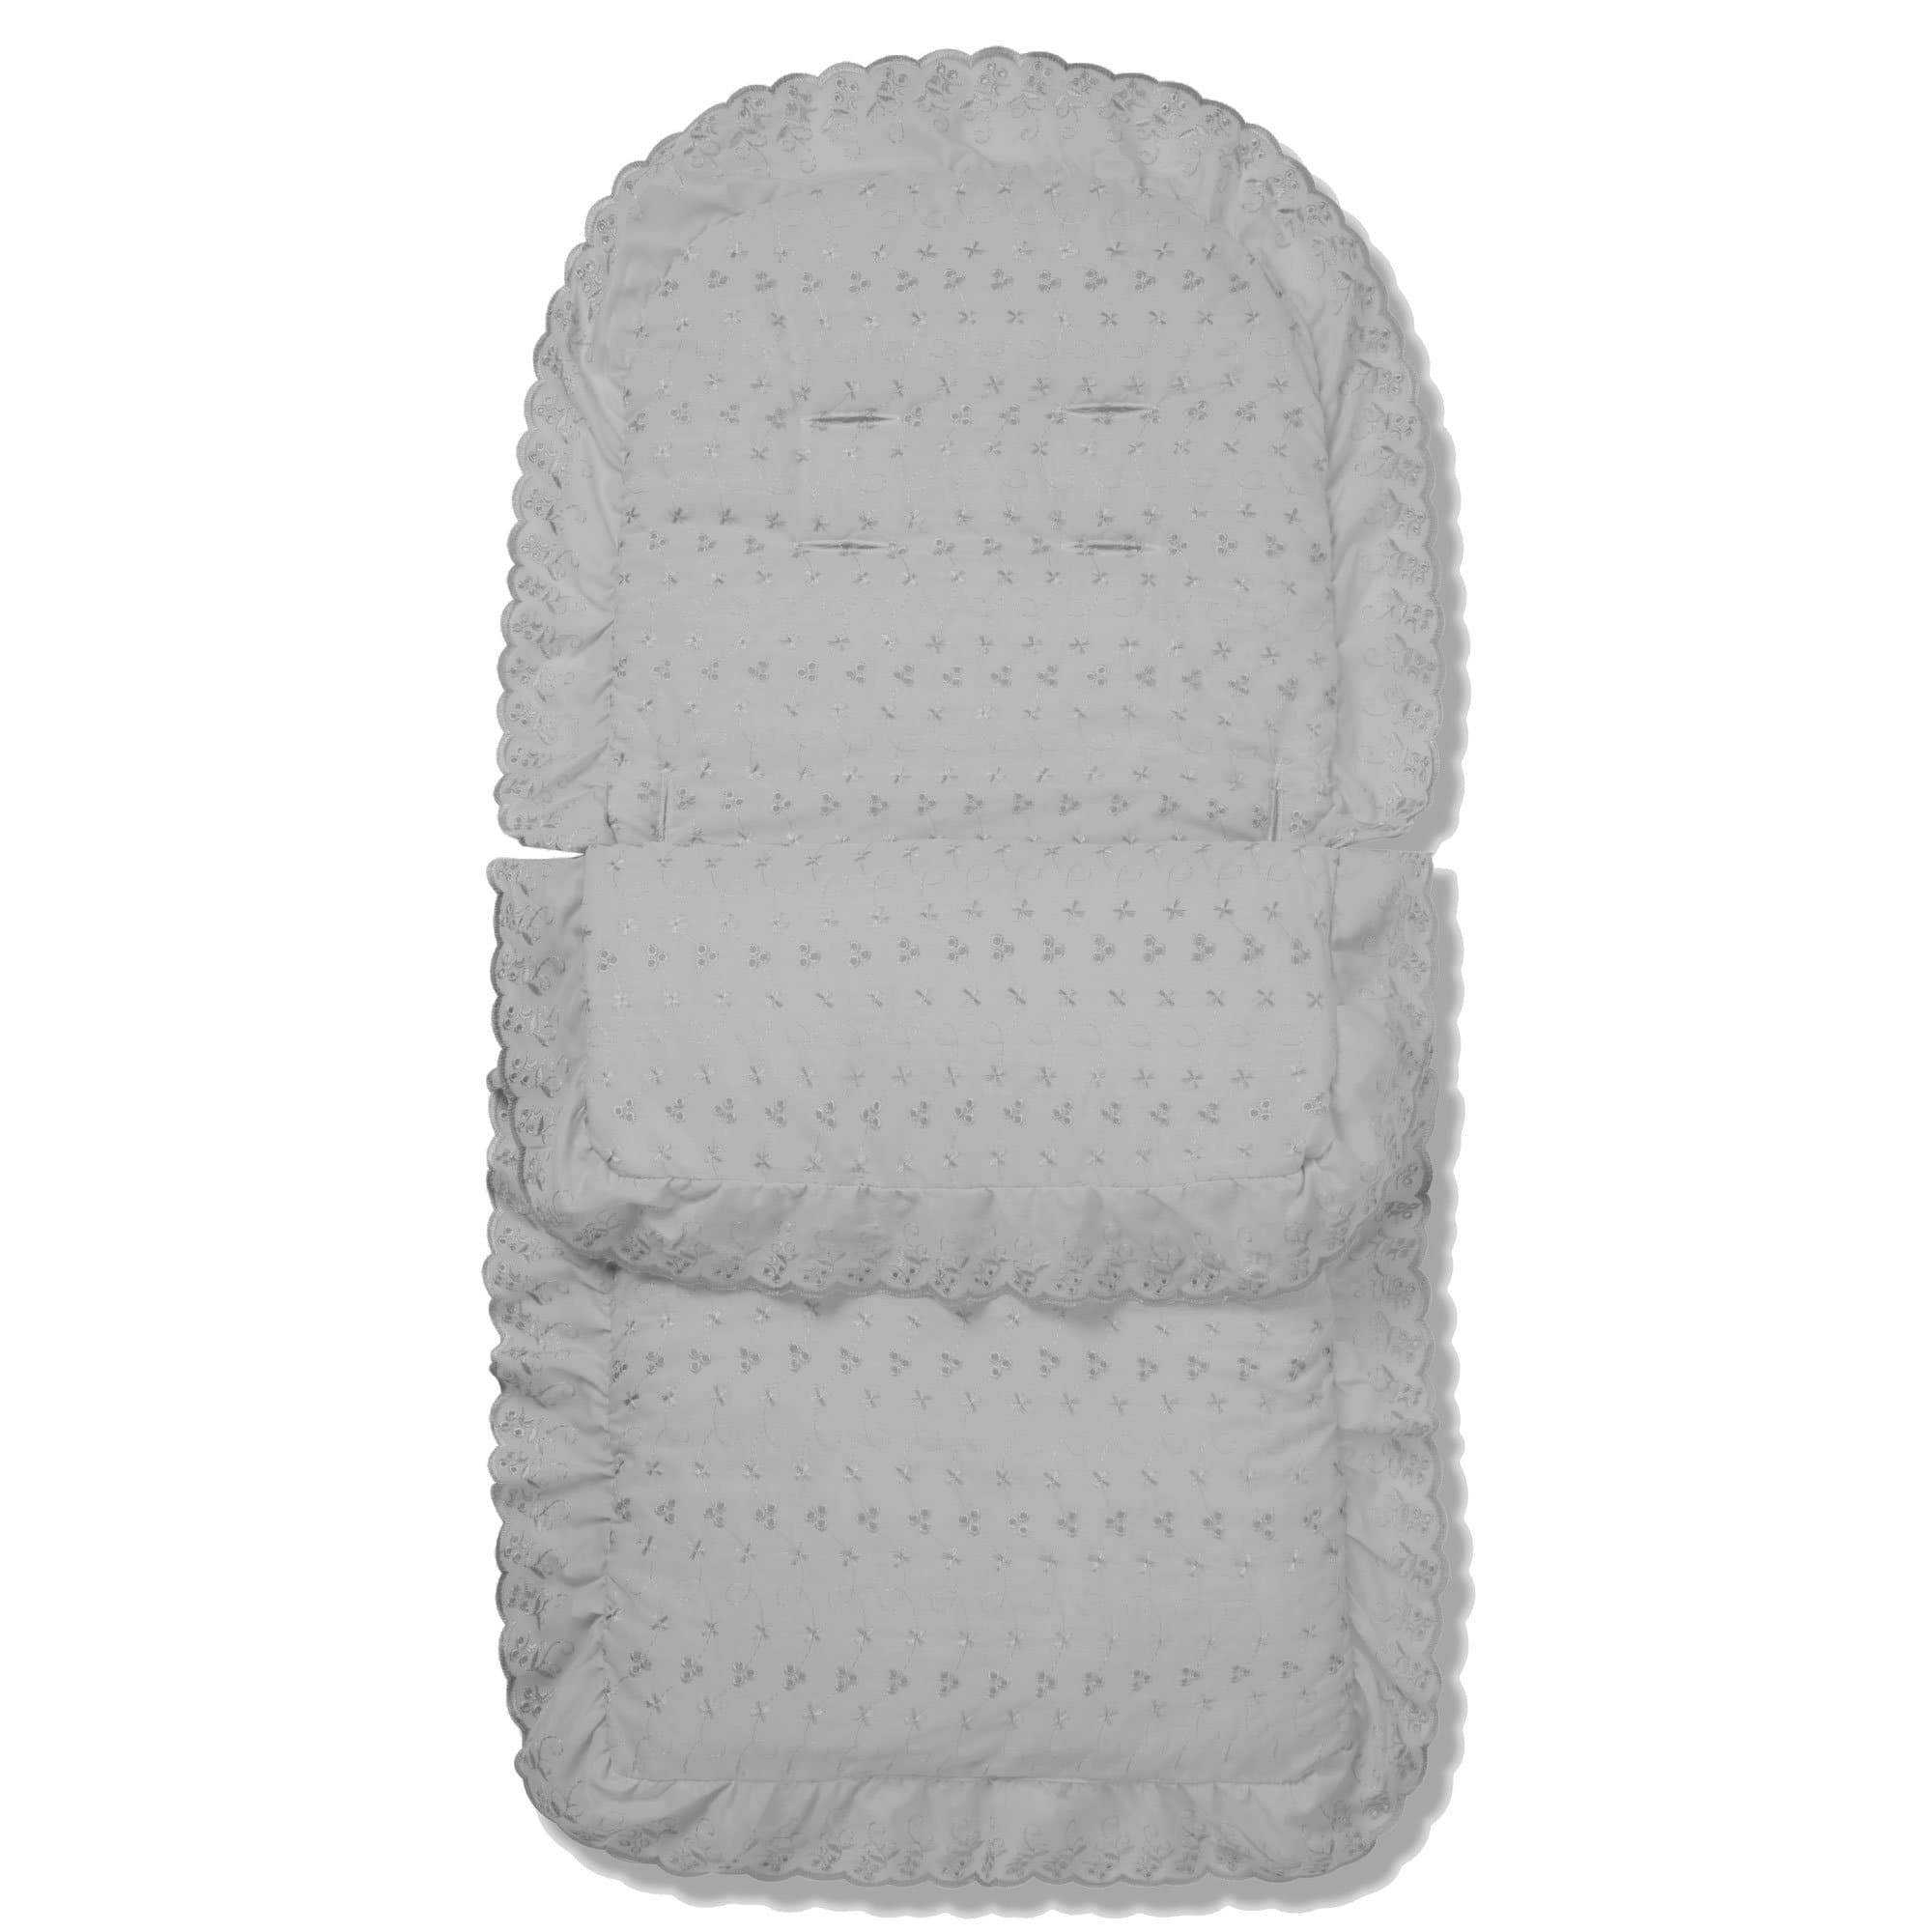 Universal Broderie Anglaise Pushchair Footmuff / Cosy Toes - Fits All Pushchairs / Prams And Buggies - Grey / Fits All Models | For Your Little One